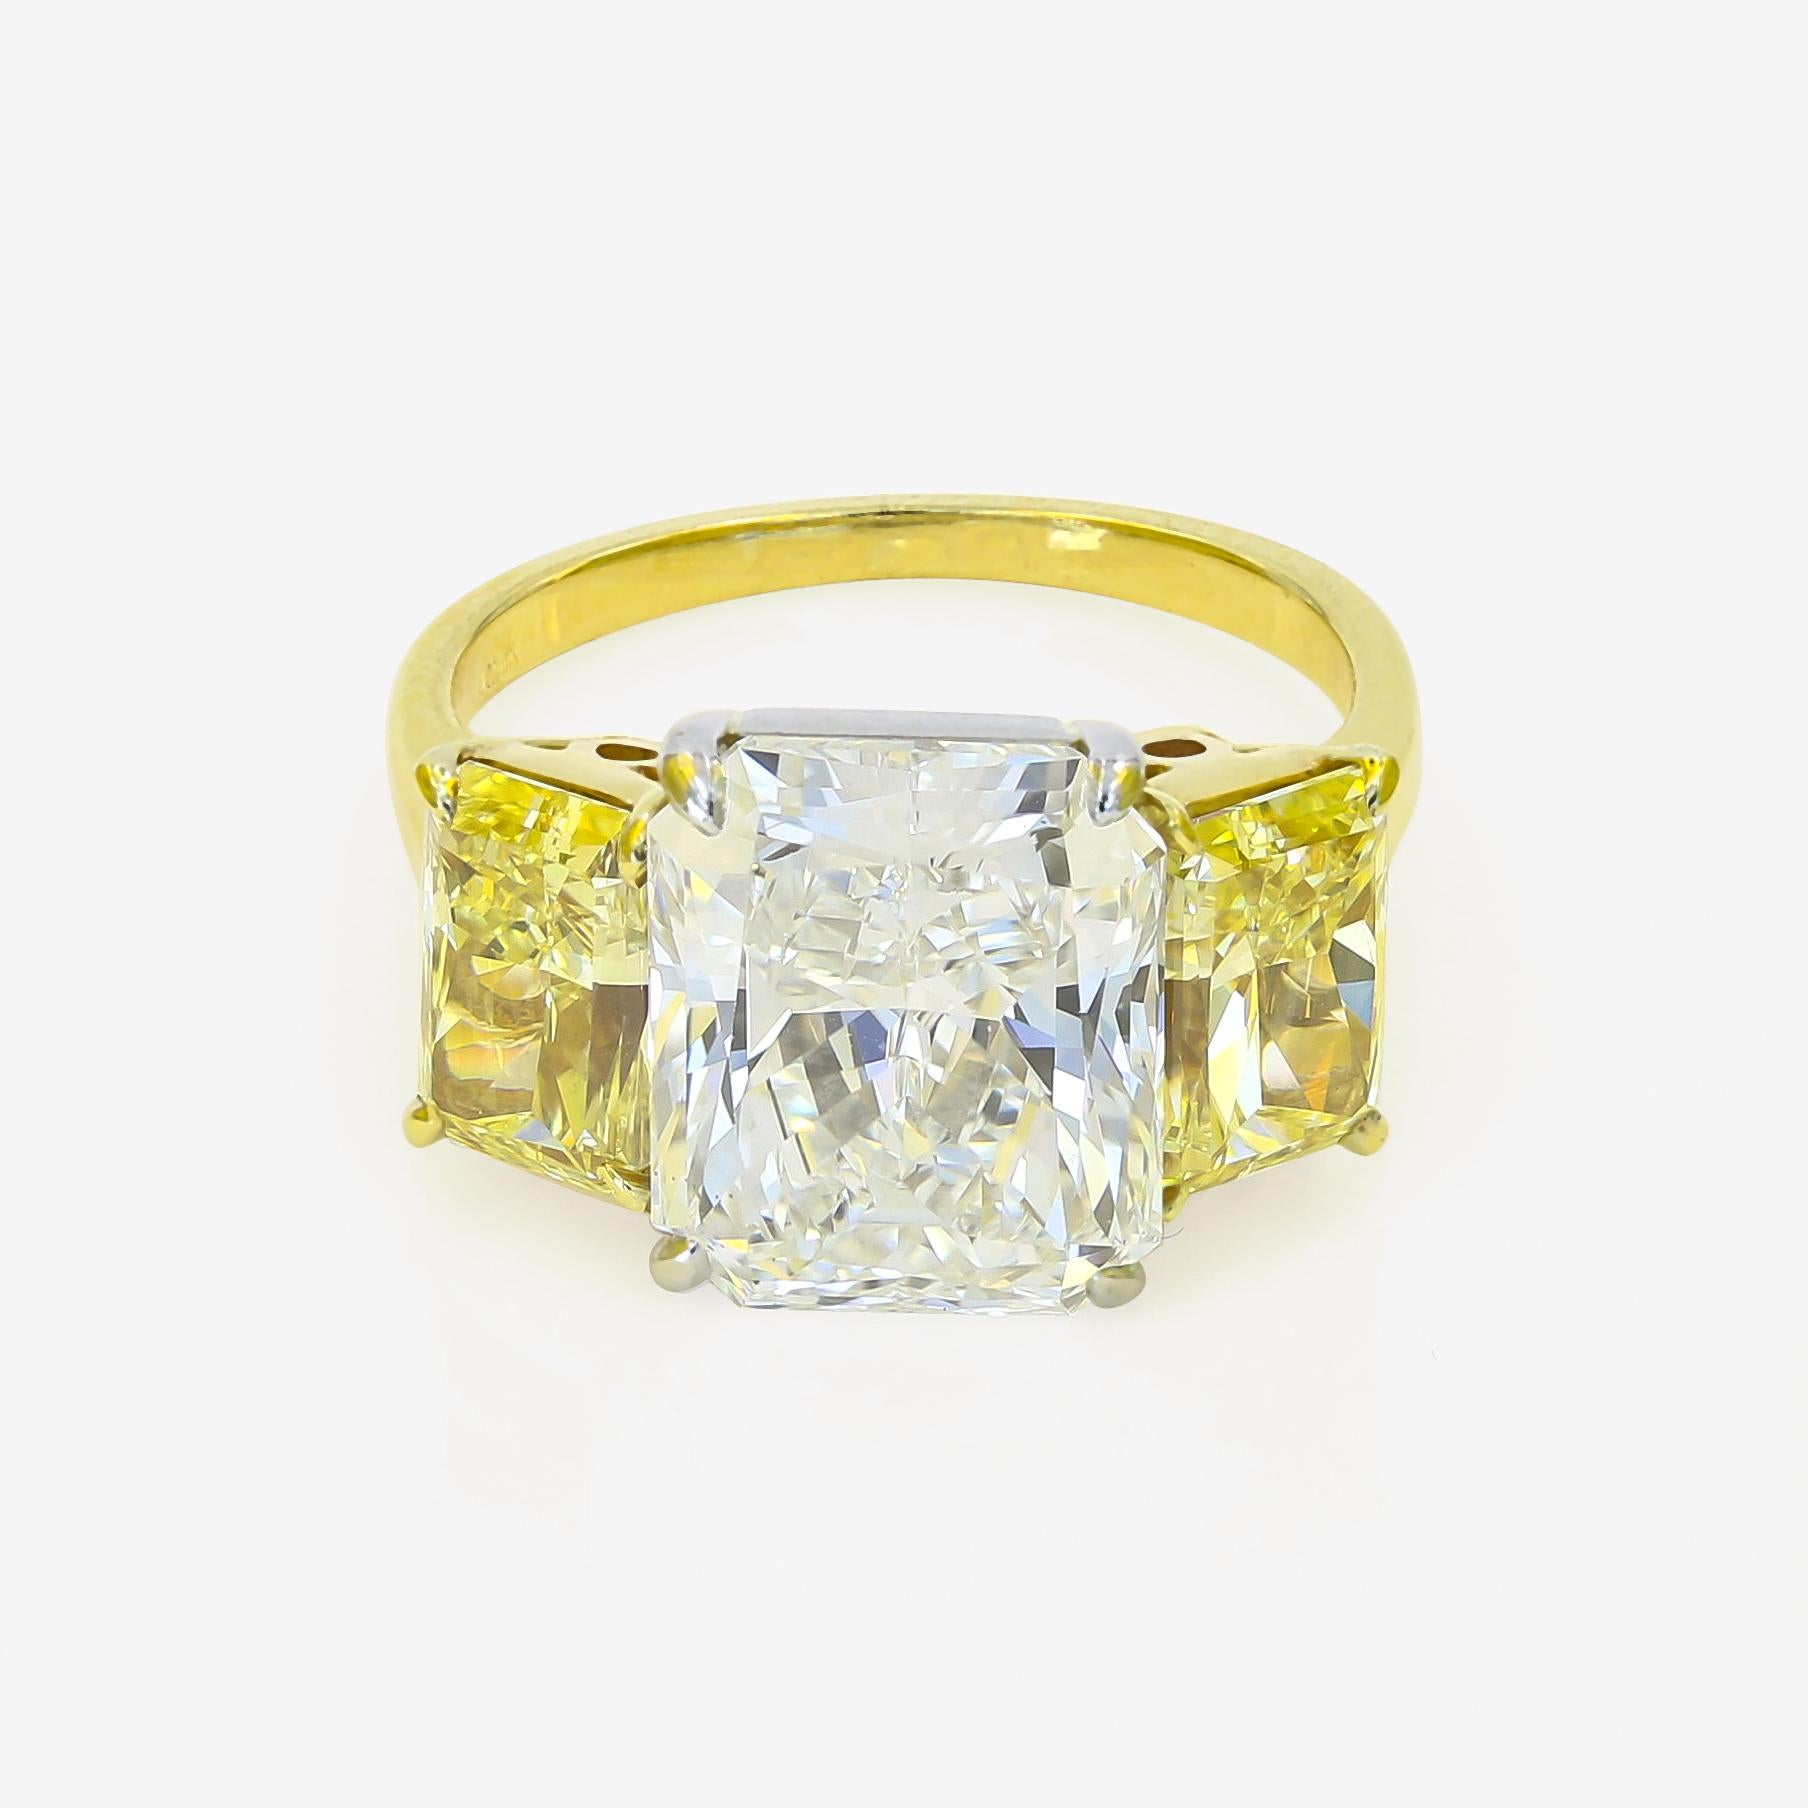 Contemporary GIA Certified 6.00cts. Radiant Cut and Two Fancy Yellow Radiant Cut Diamond Ring